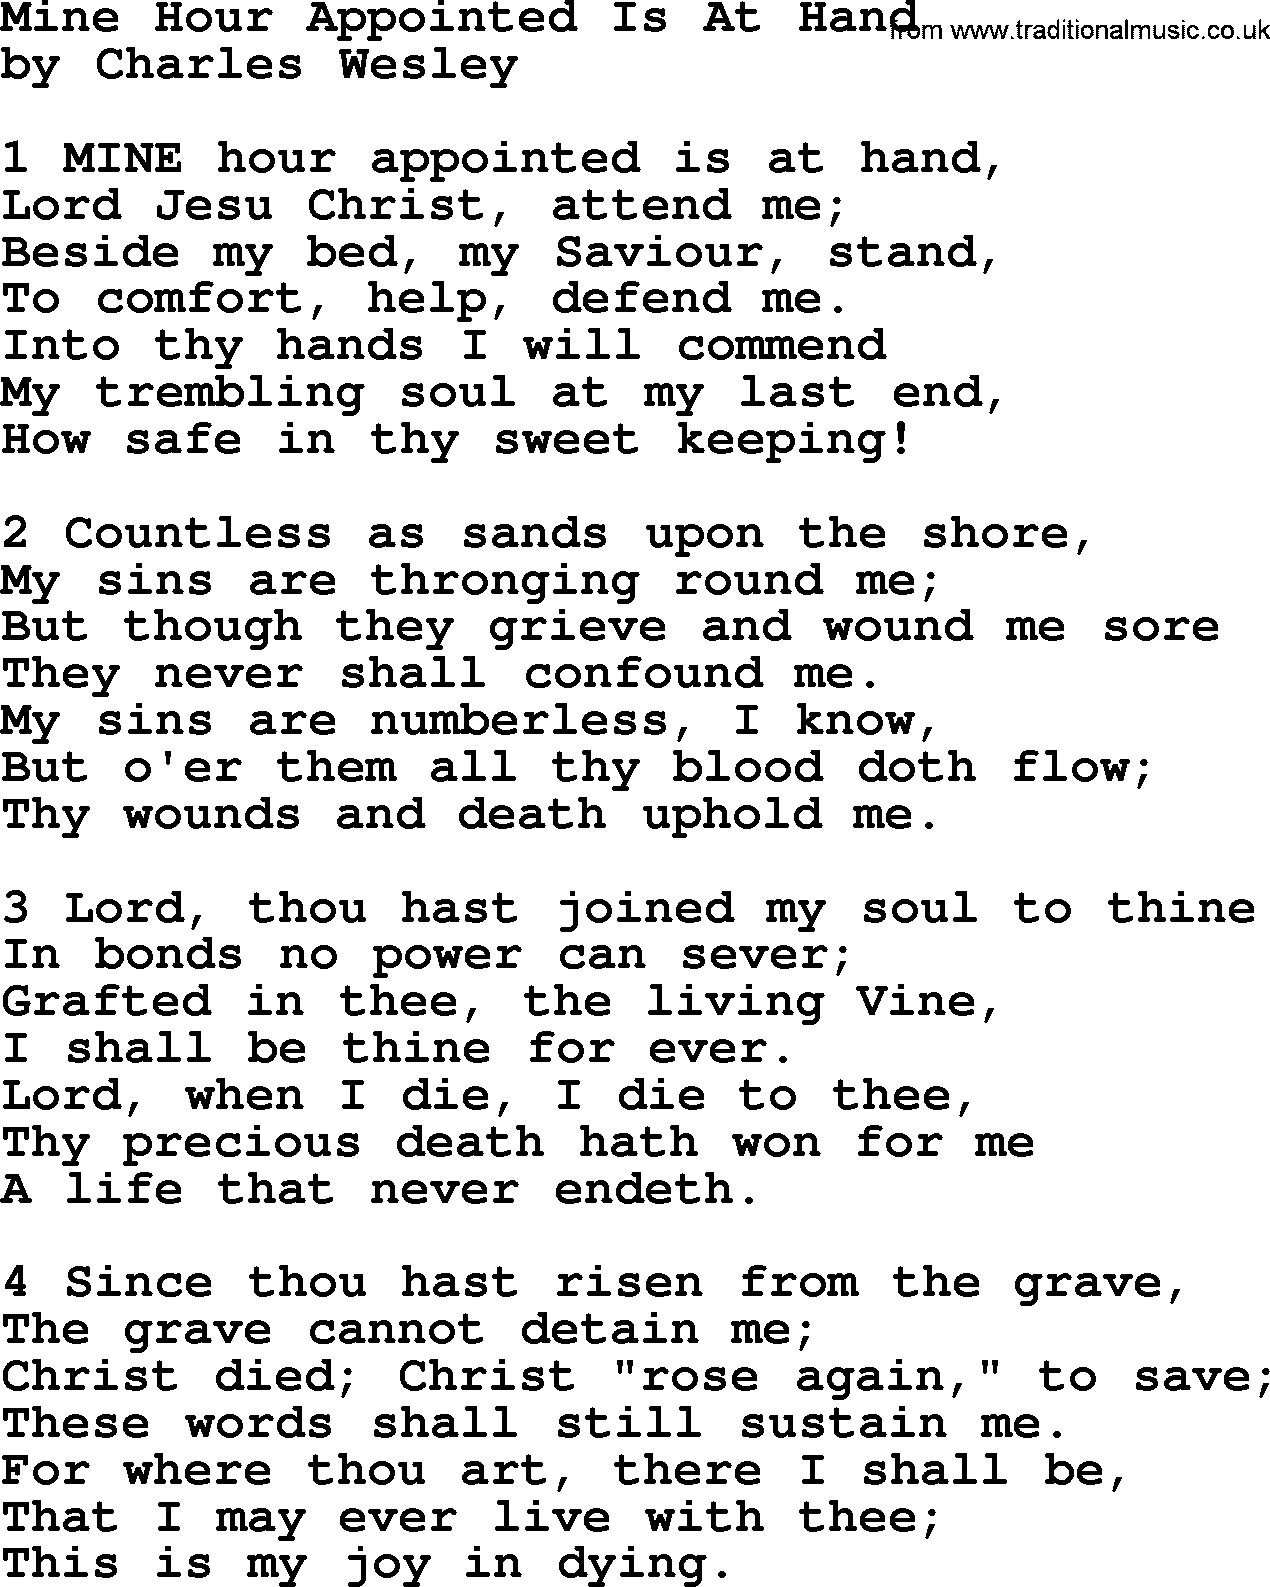 Charles Wesley hymn: Mine Hour Appointed Is At Hand, lyrics